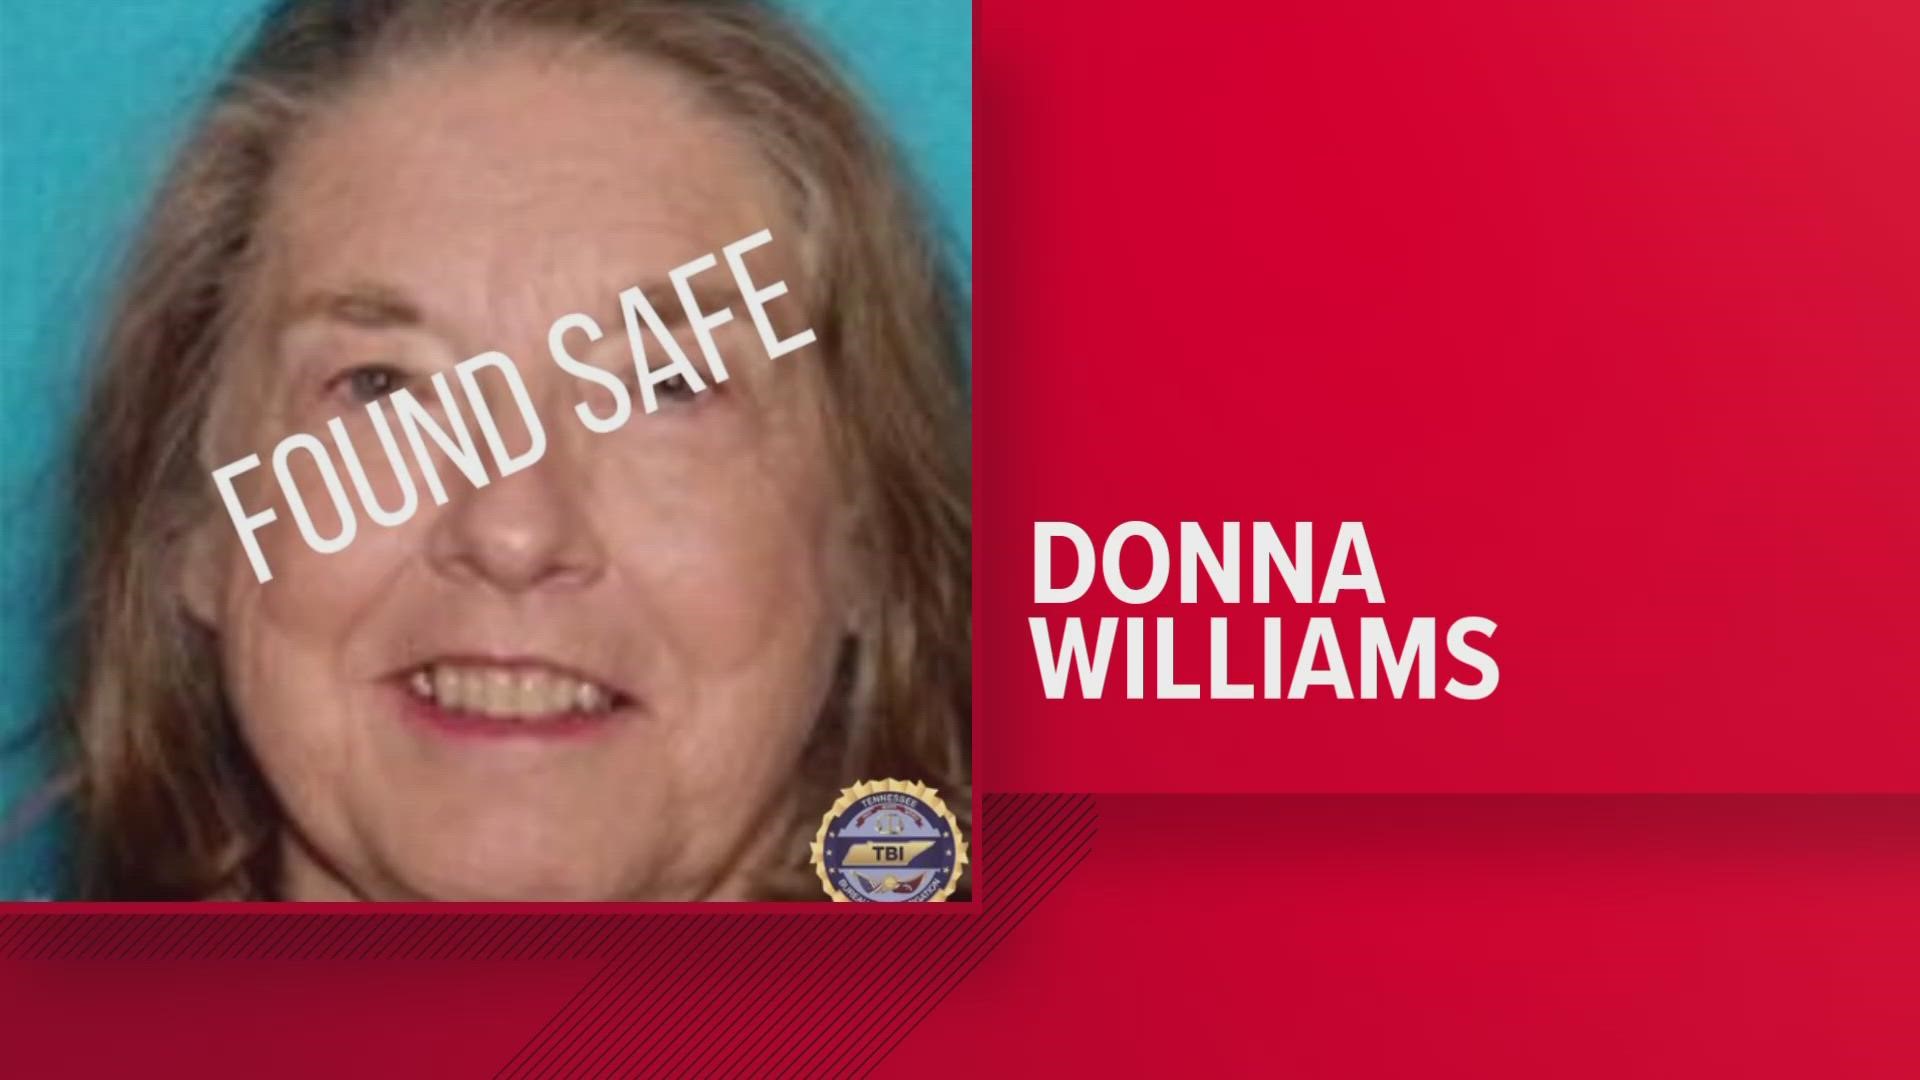 Donna Williams was found safe, according to the TBI.